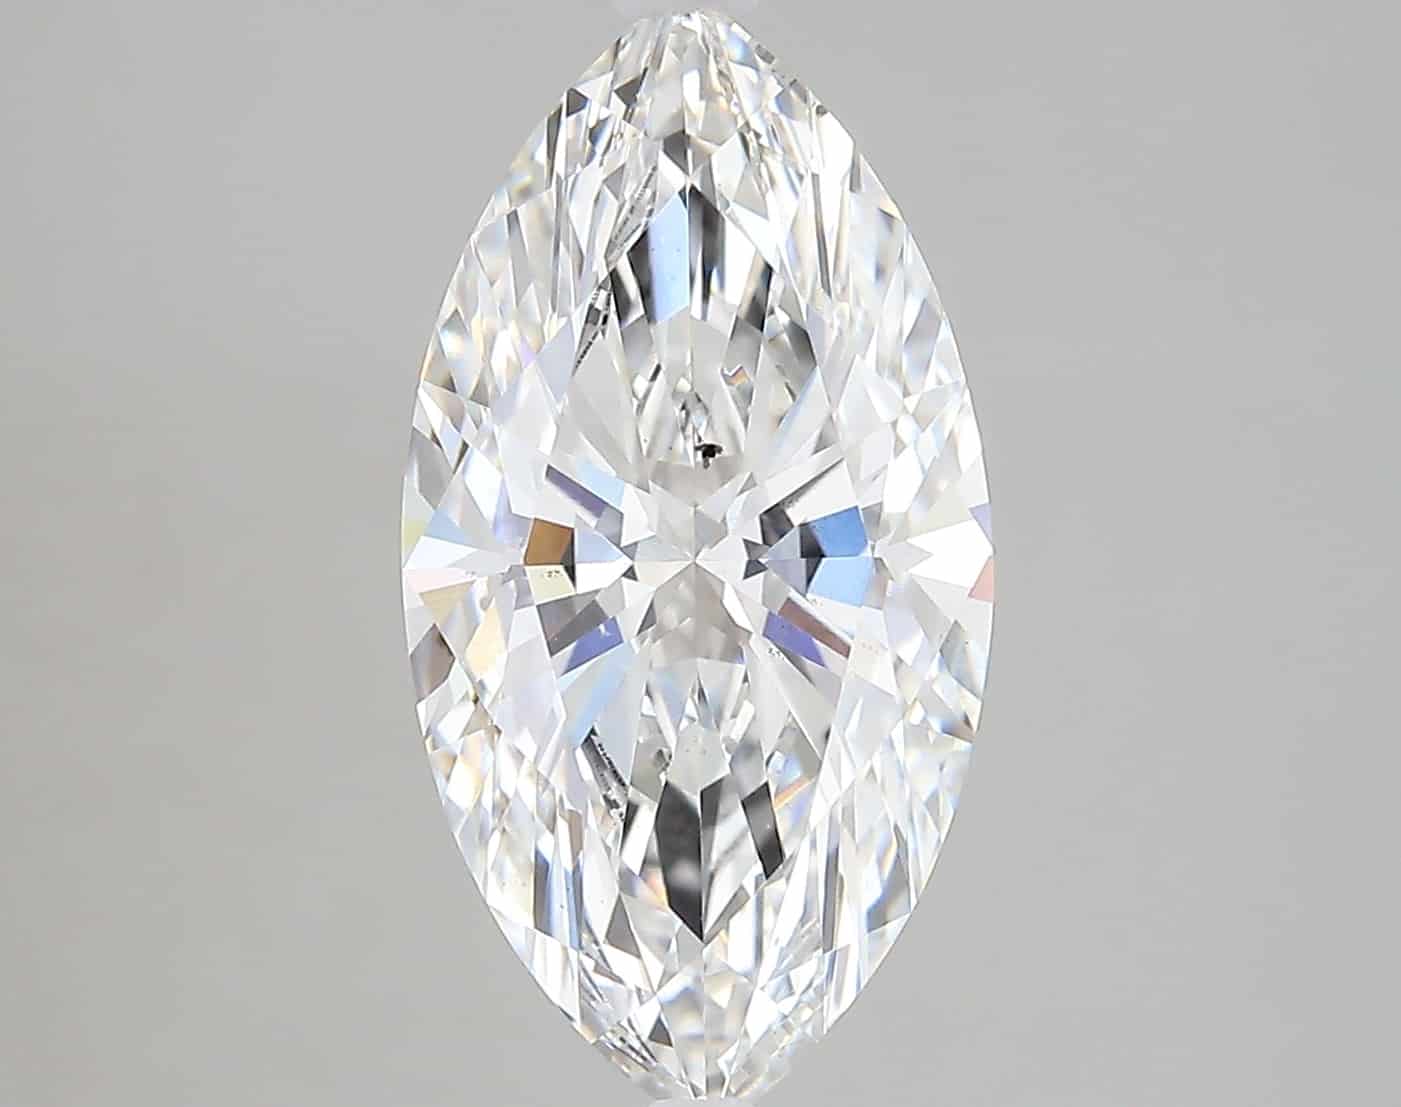 Lab Grown 3.39 Carat Diamond IGI Certified si1 clarity and F color